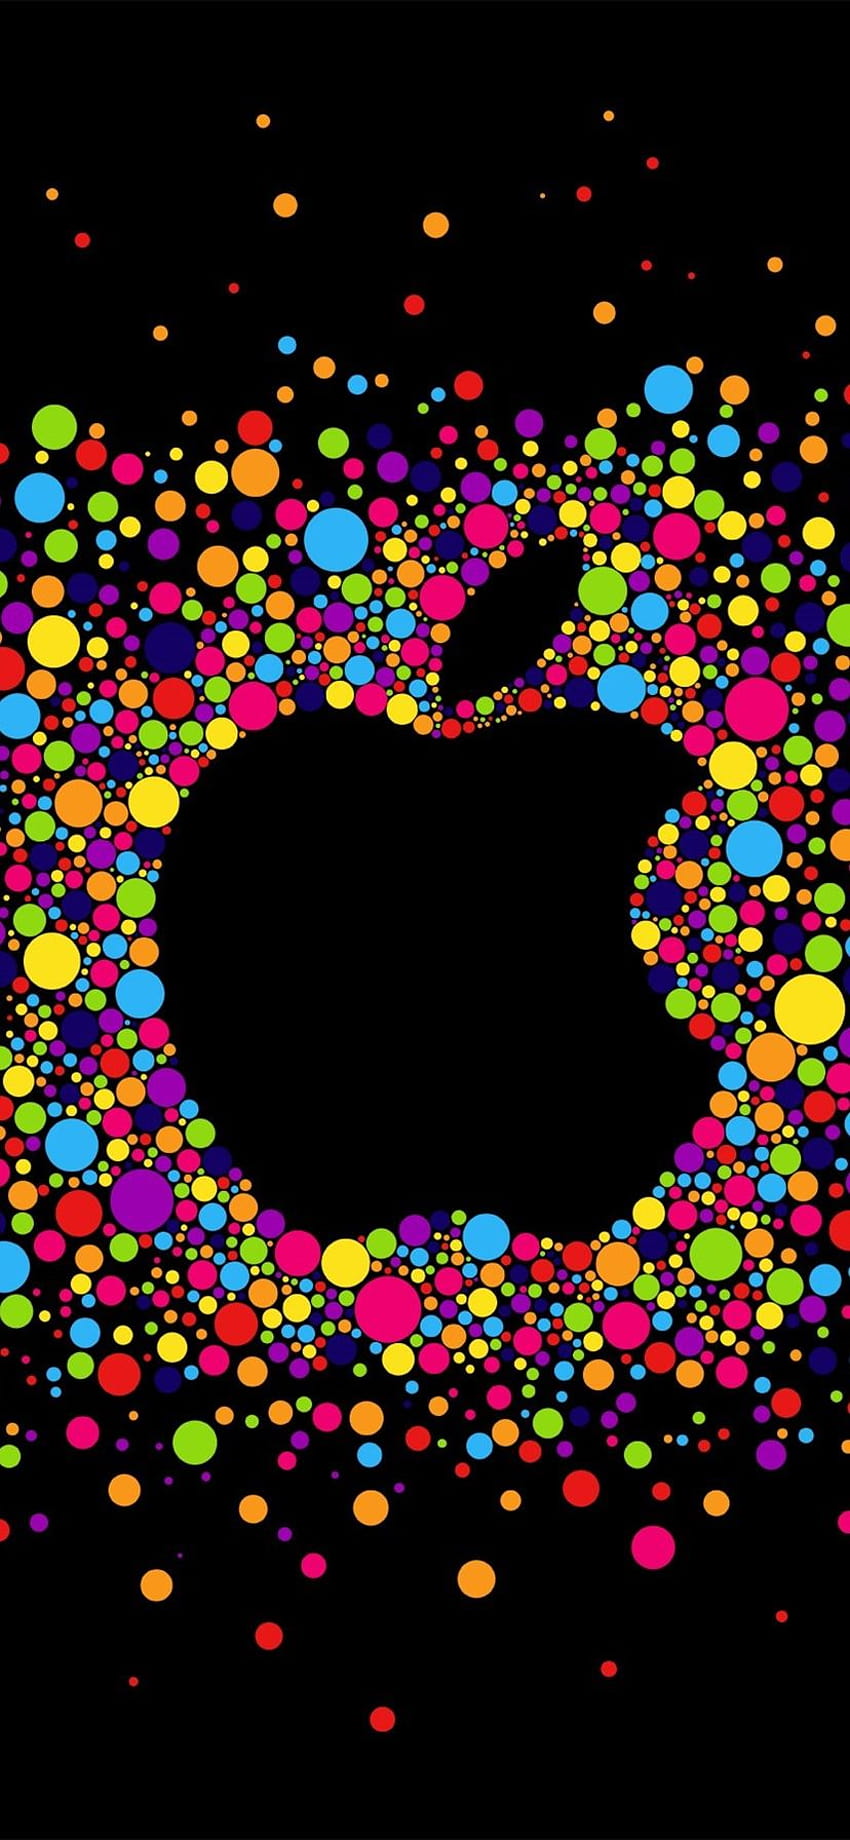 Colorful circles, Apple logo, black backgrounds 828x1792 iPhone 11, iphone 11 xr HD phone wallpaper